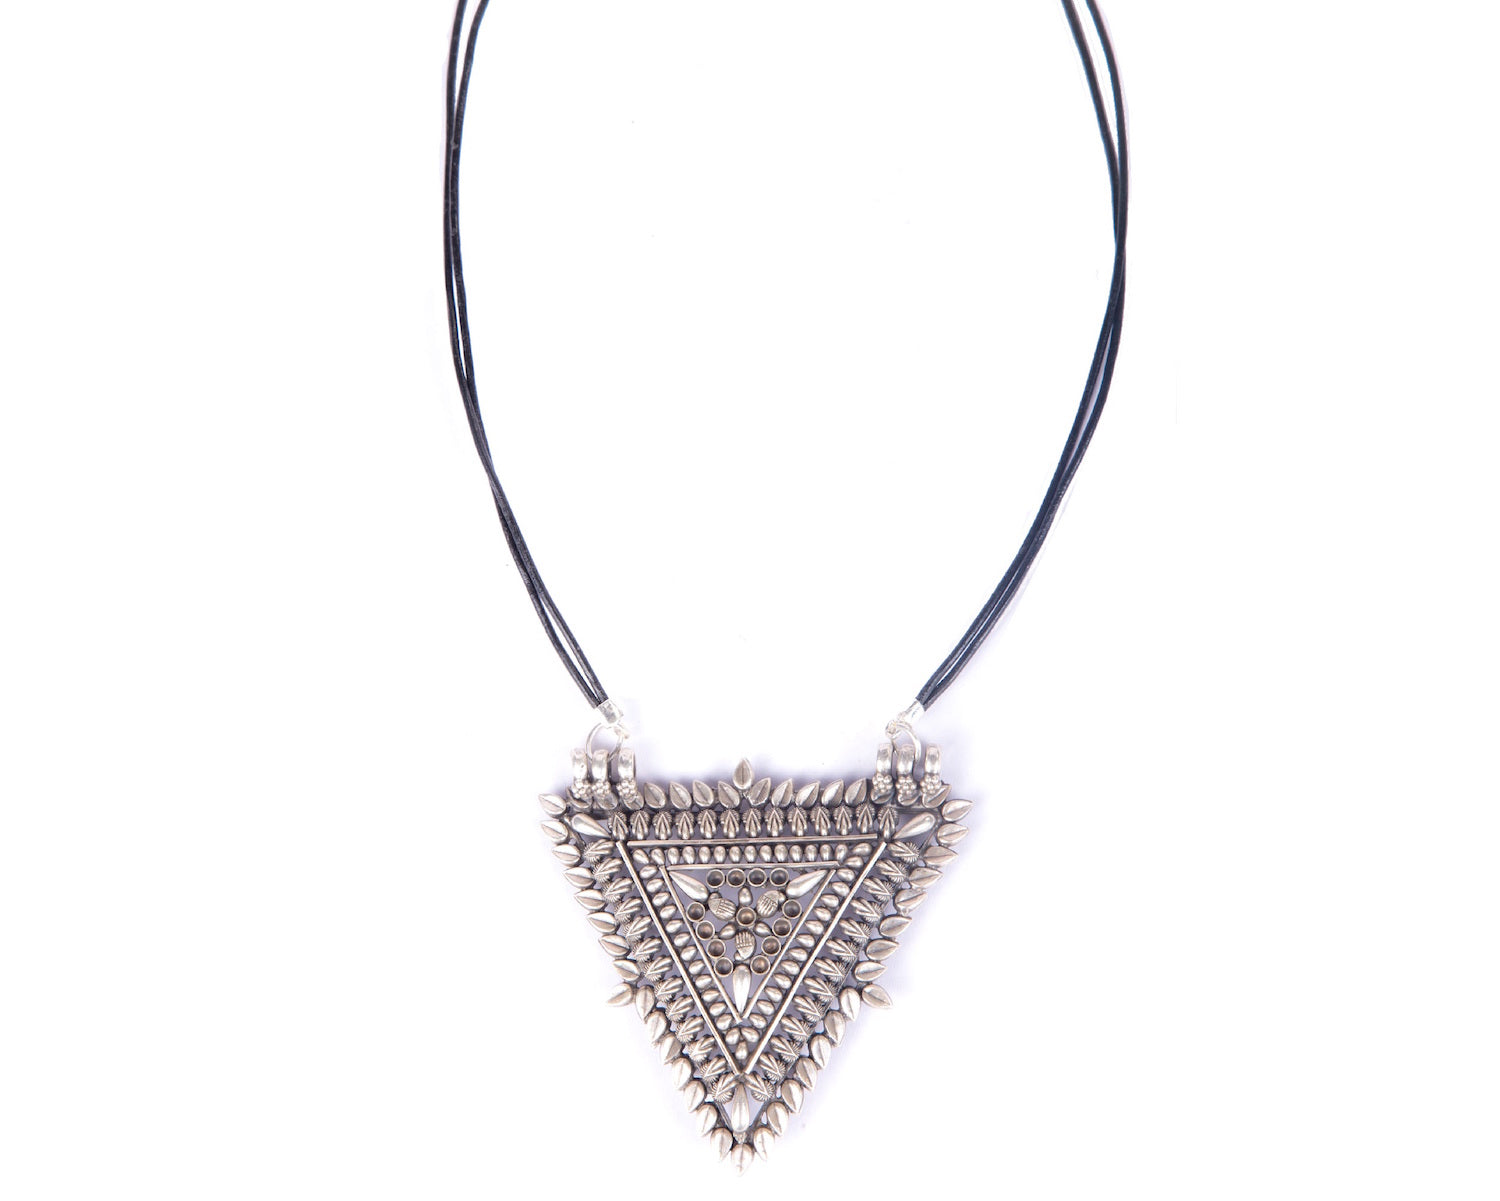 Sterling silver oxidized triangular shaped pendant strung in twin leather cords